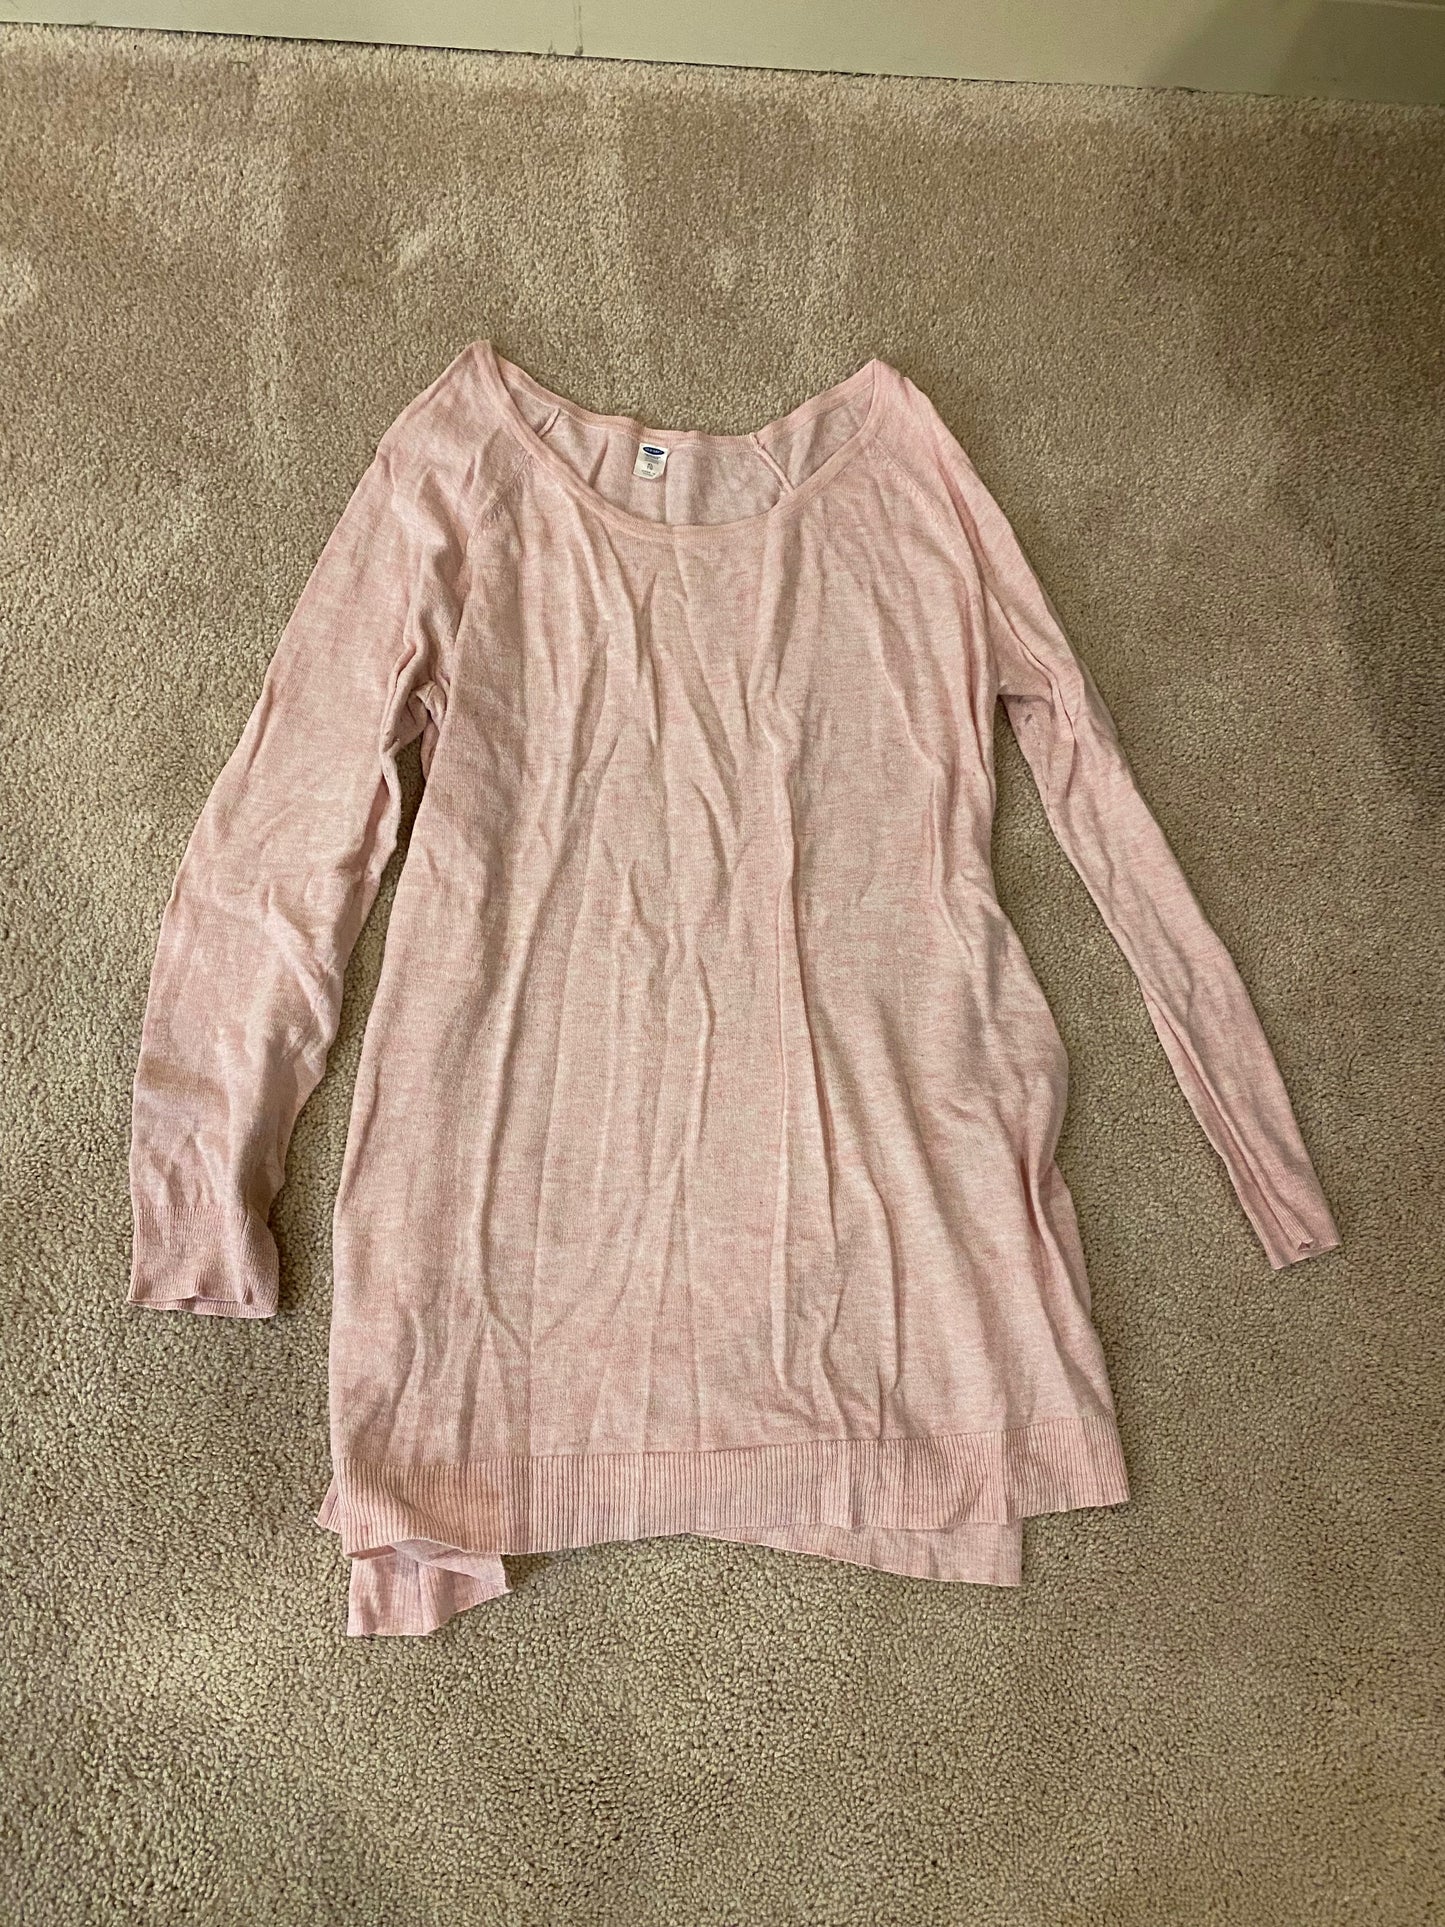 Old Navy Maternity Sweater-Size XL